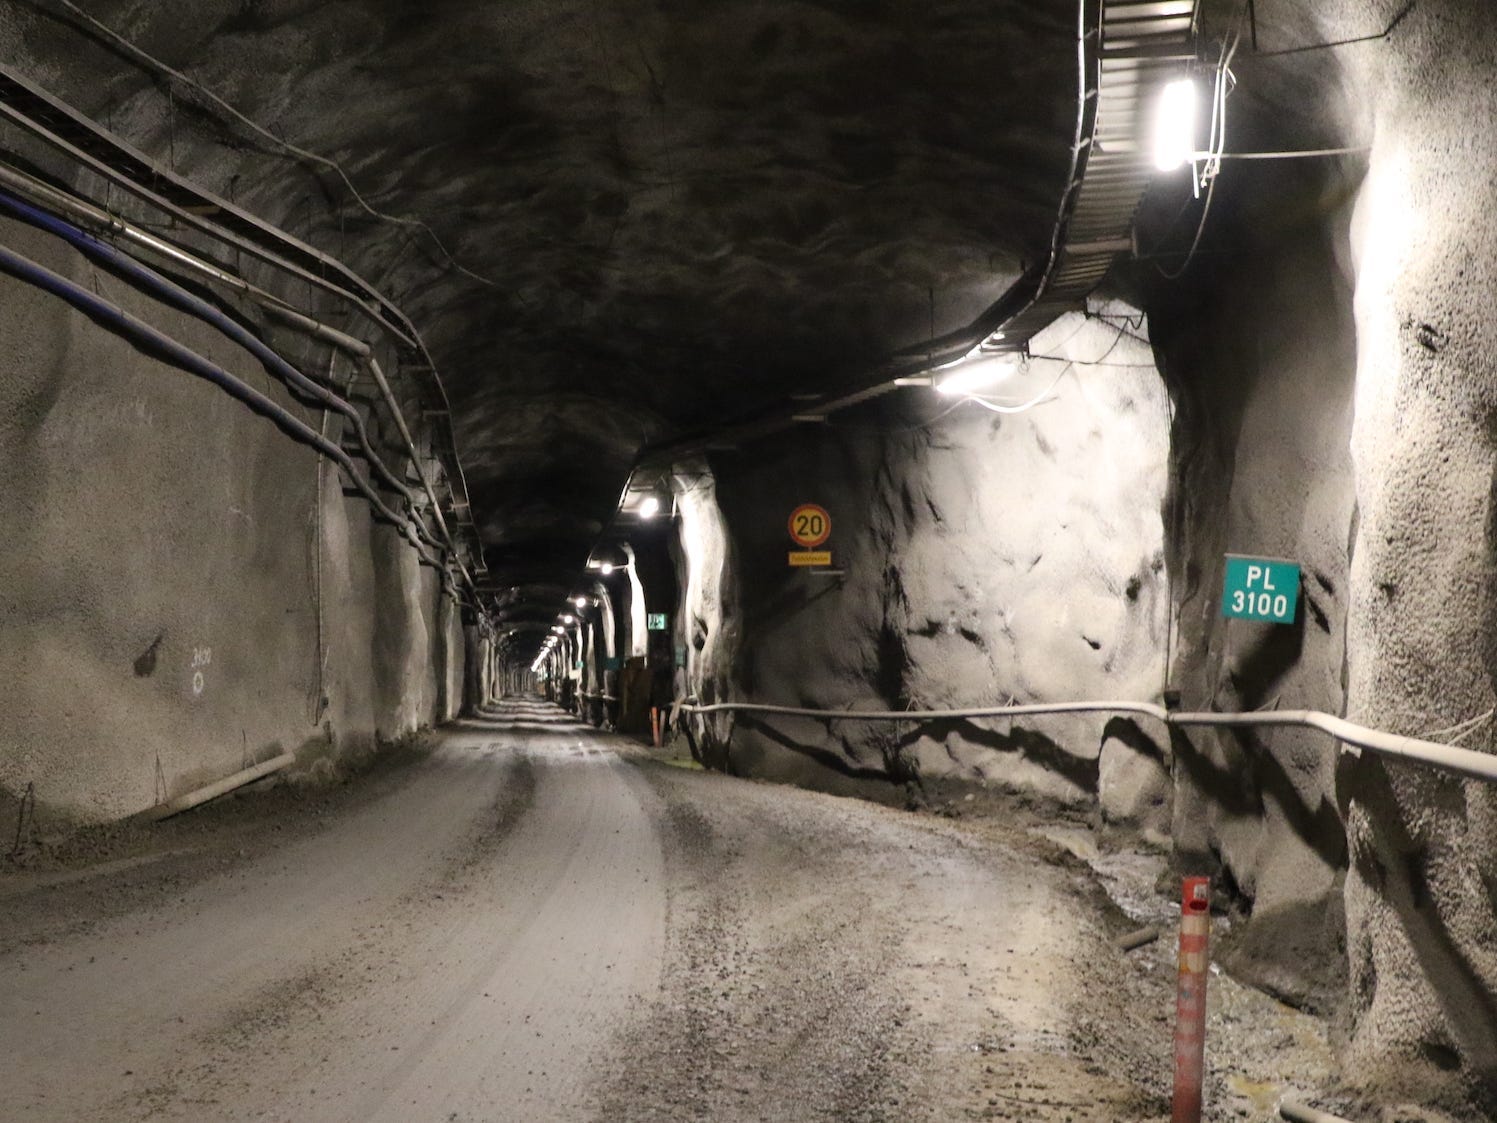 A picture of the tunnels in Onkalo shows a green wign reading 3100